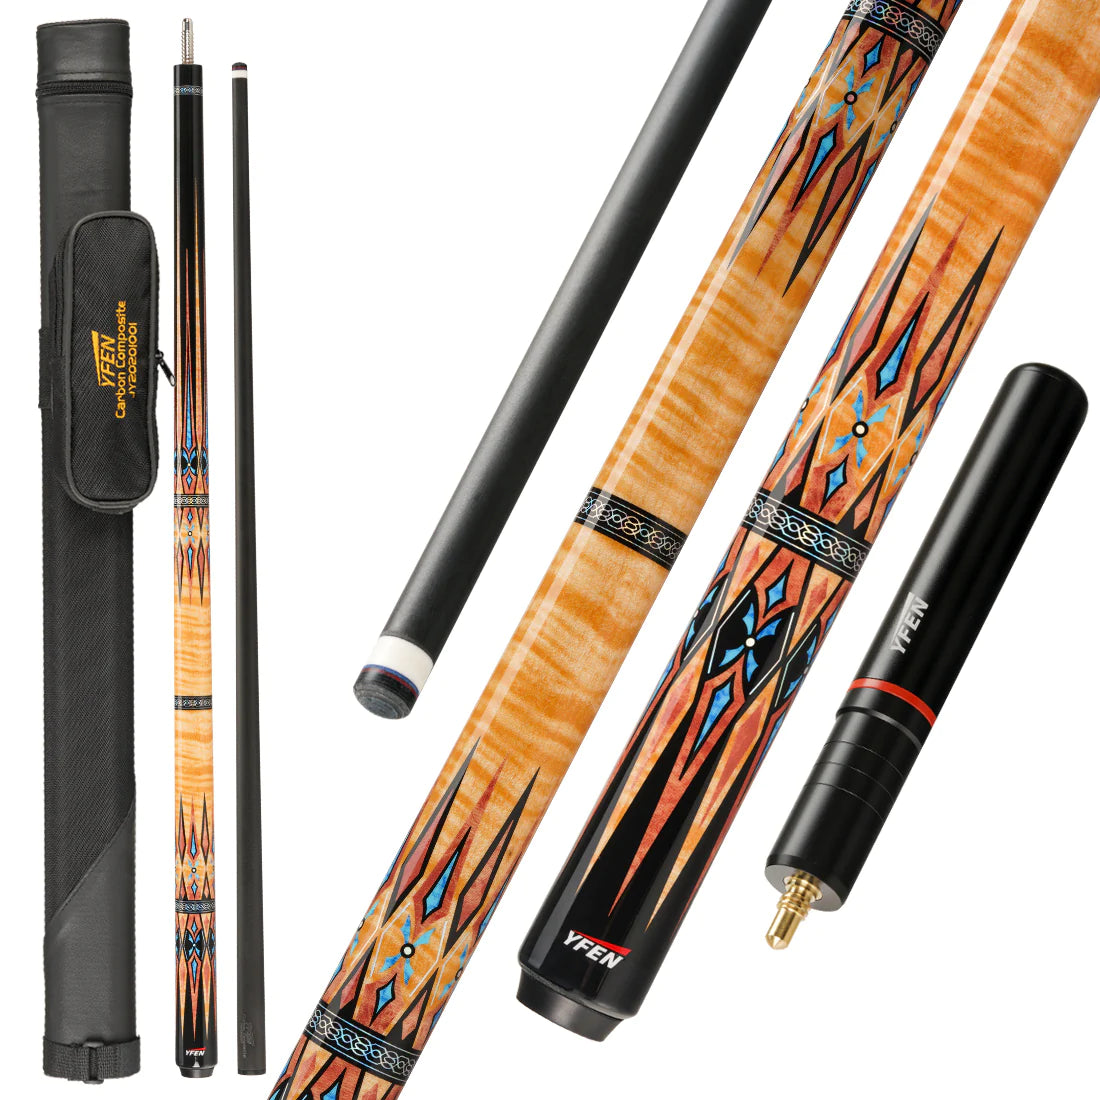 Carbon Fiber Vs Wood Pool Cue. When choosing a pool cue, you can